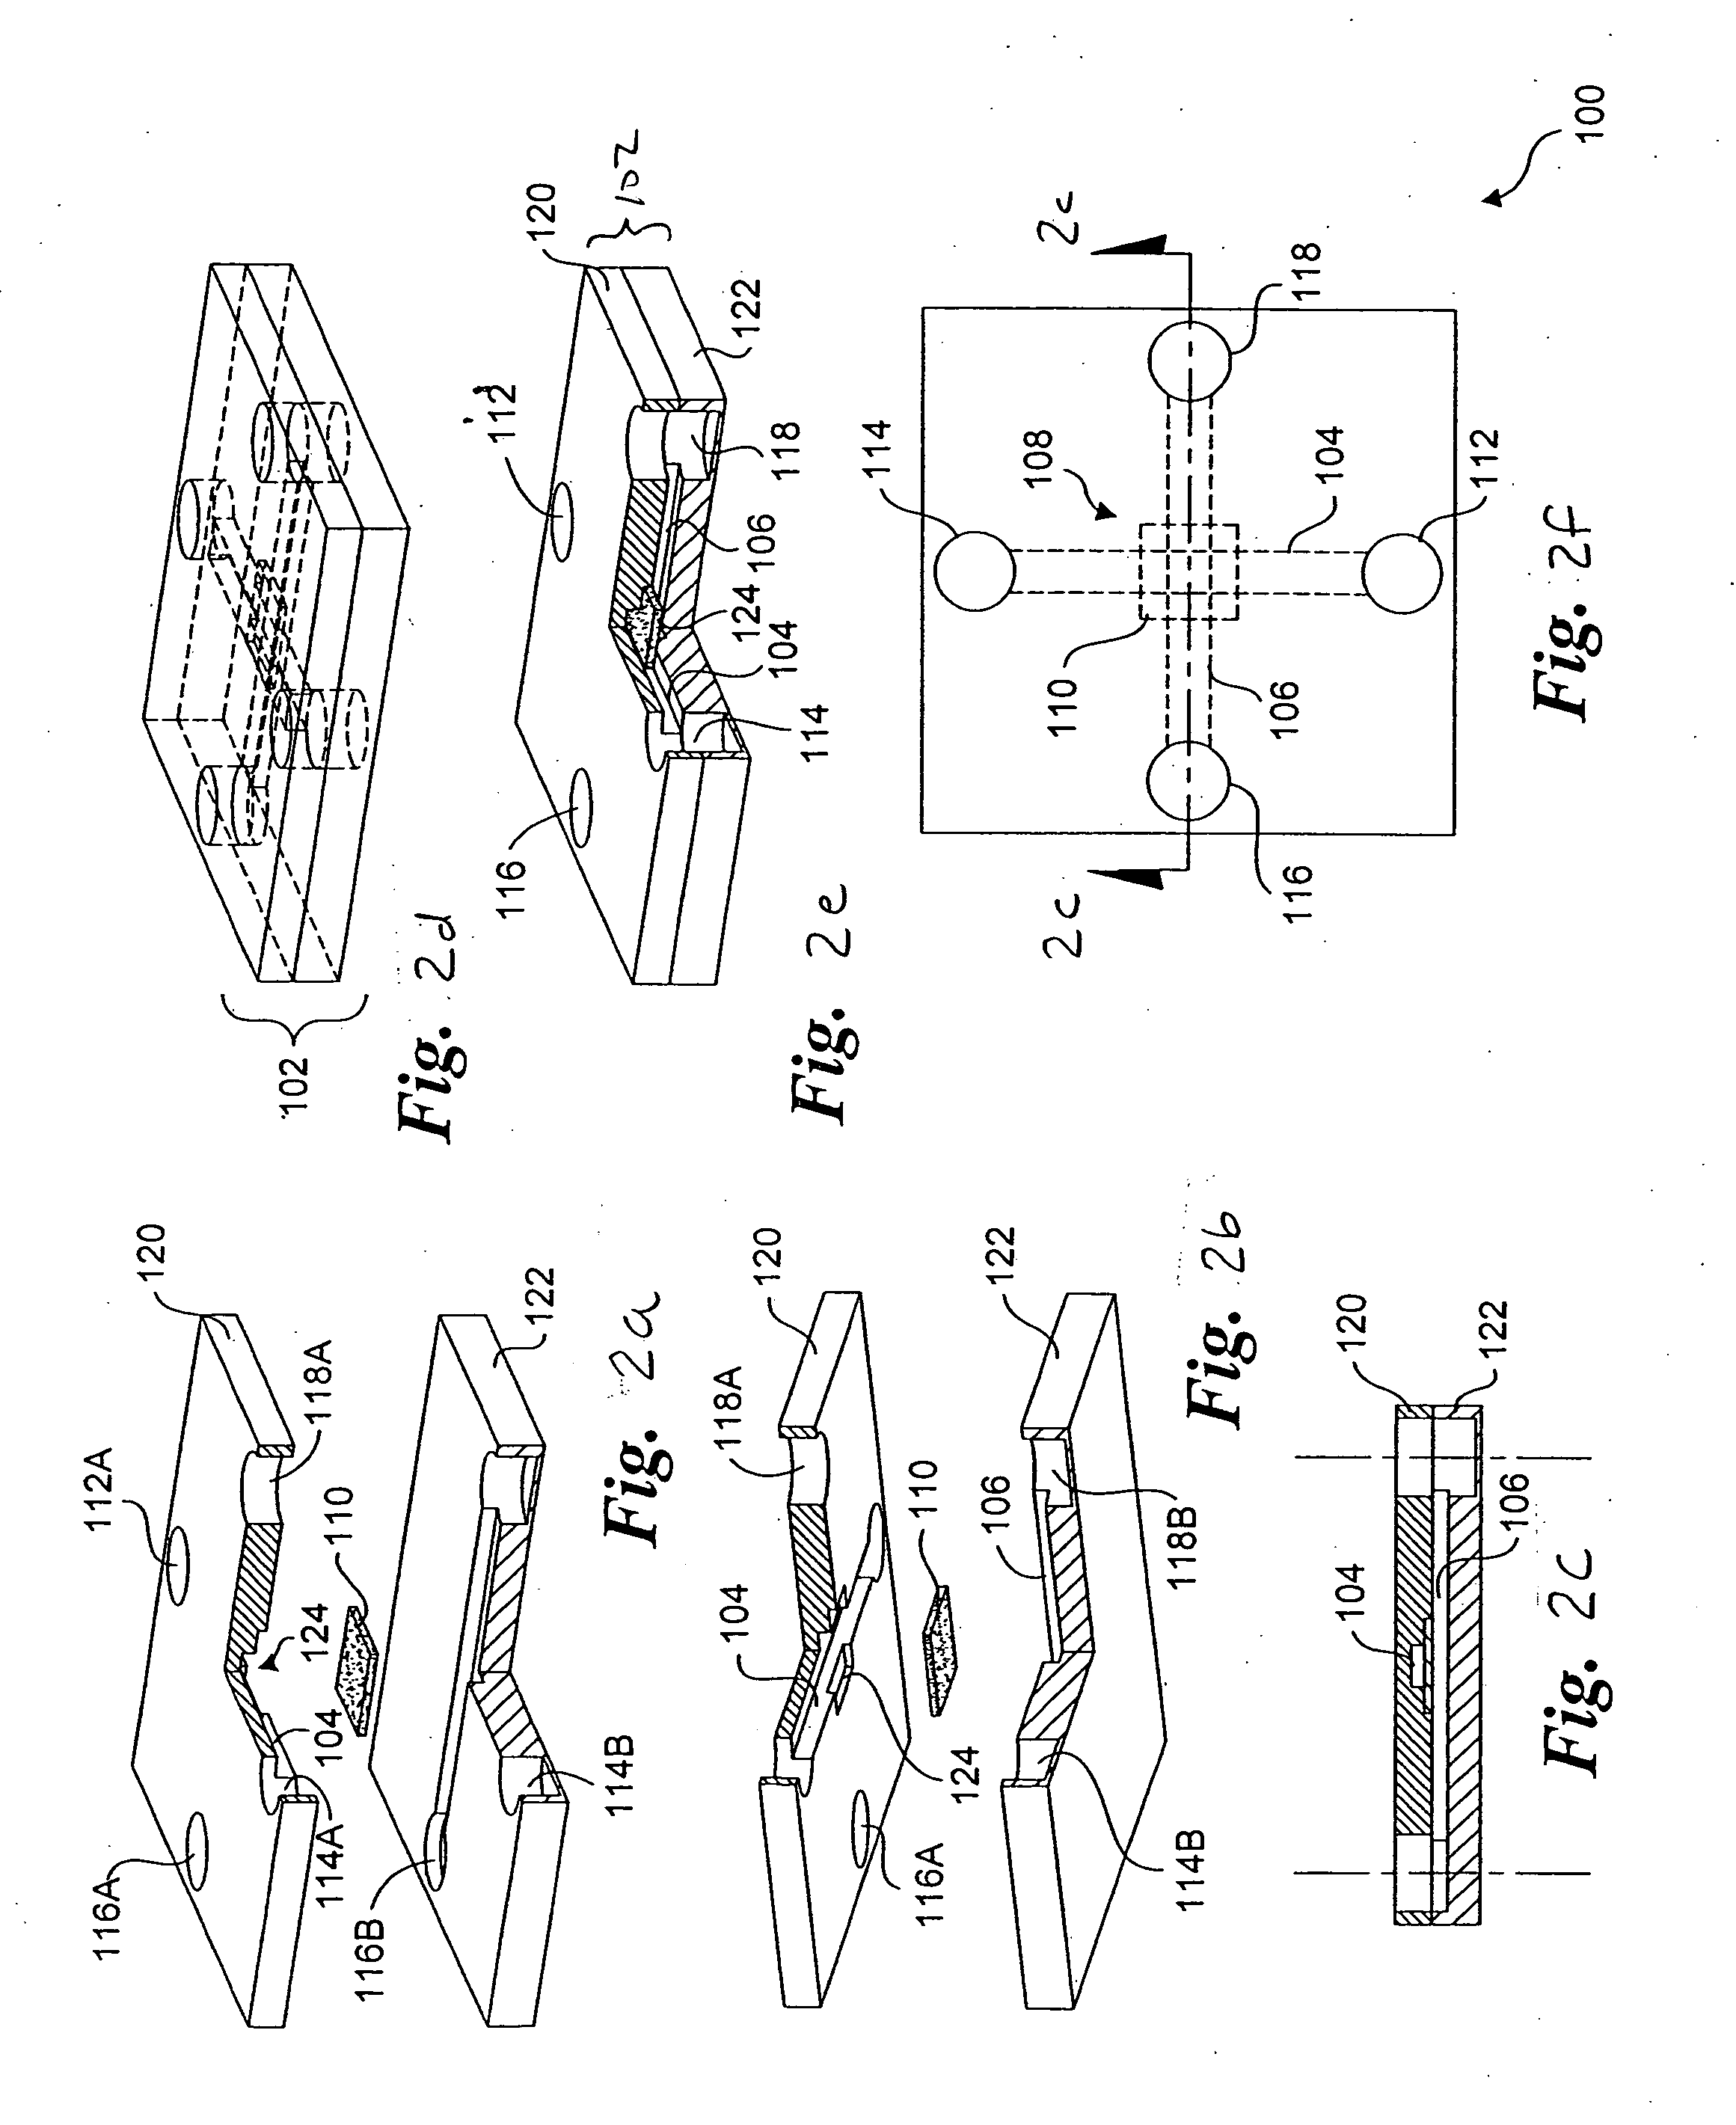 Microfluid molecular-flow fractionator and bioreactor with integrated active/passive diffusion barrier